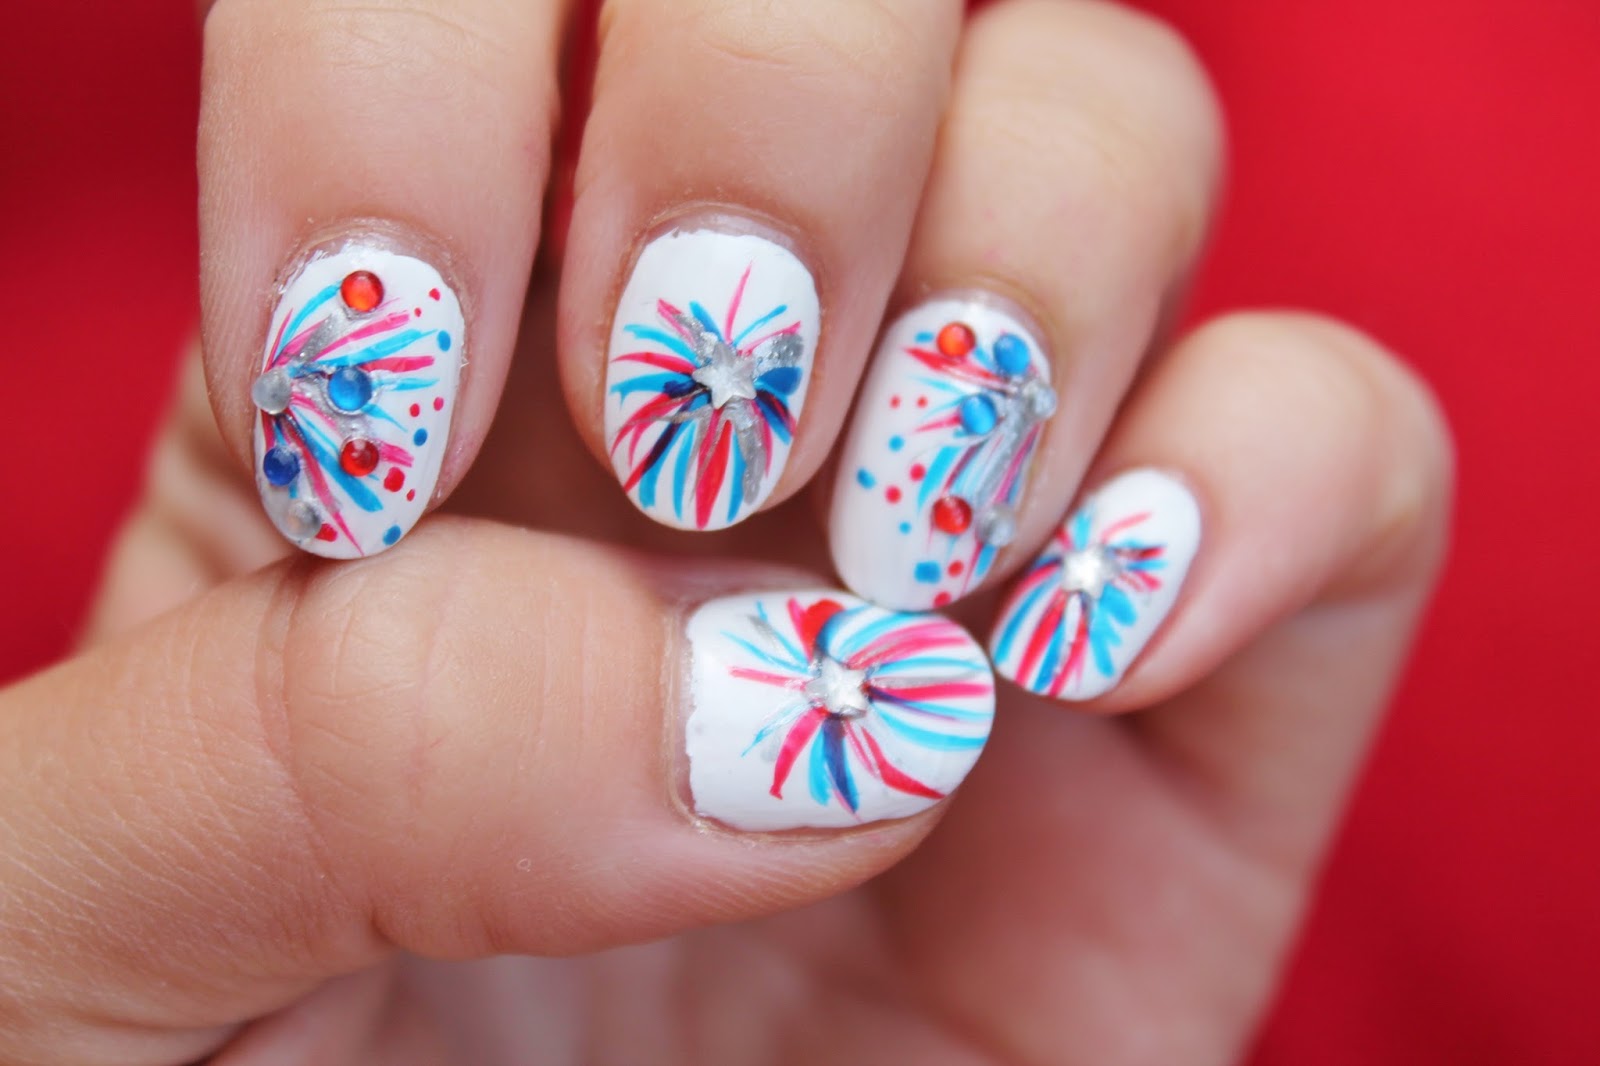 1. Patriotic Nail Art Designs for July 4th - wide 2